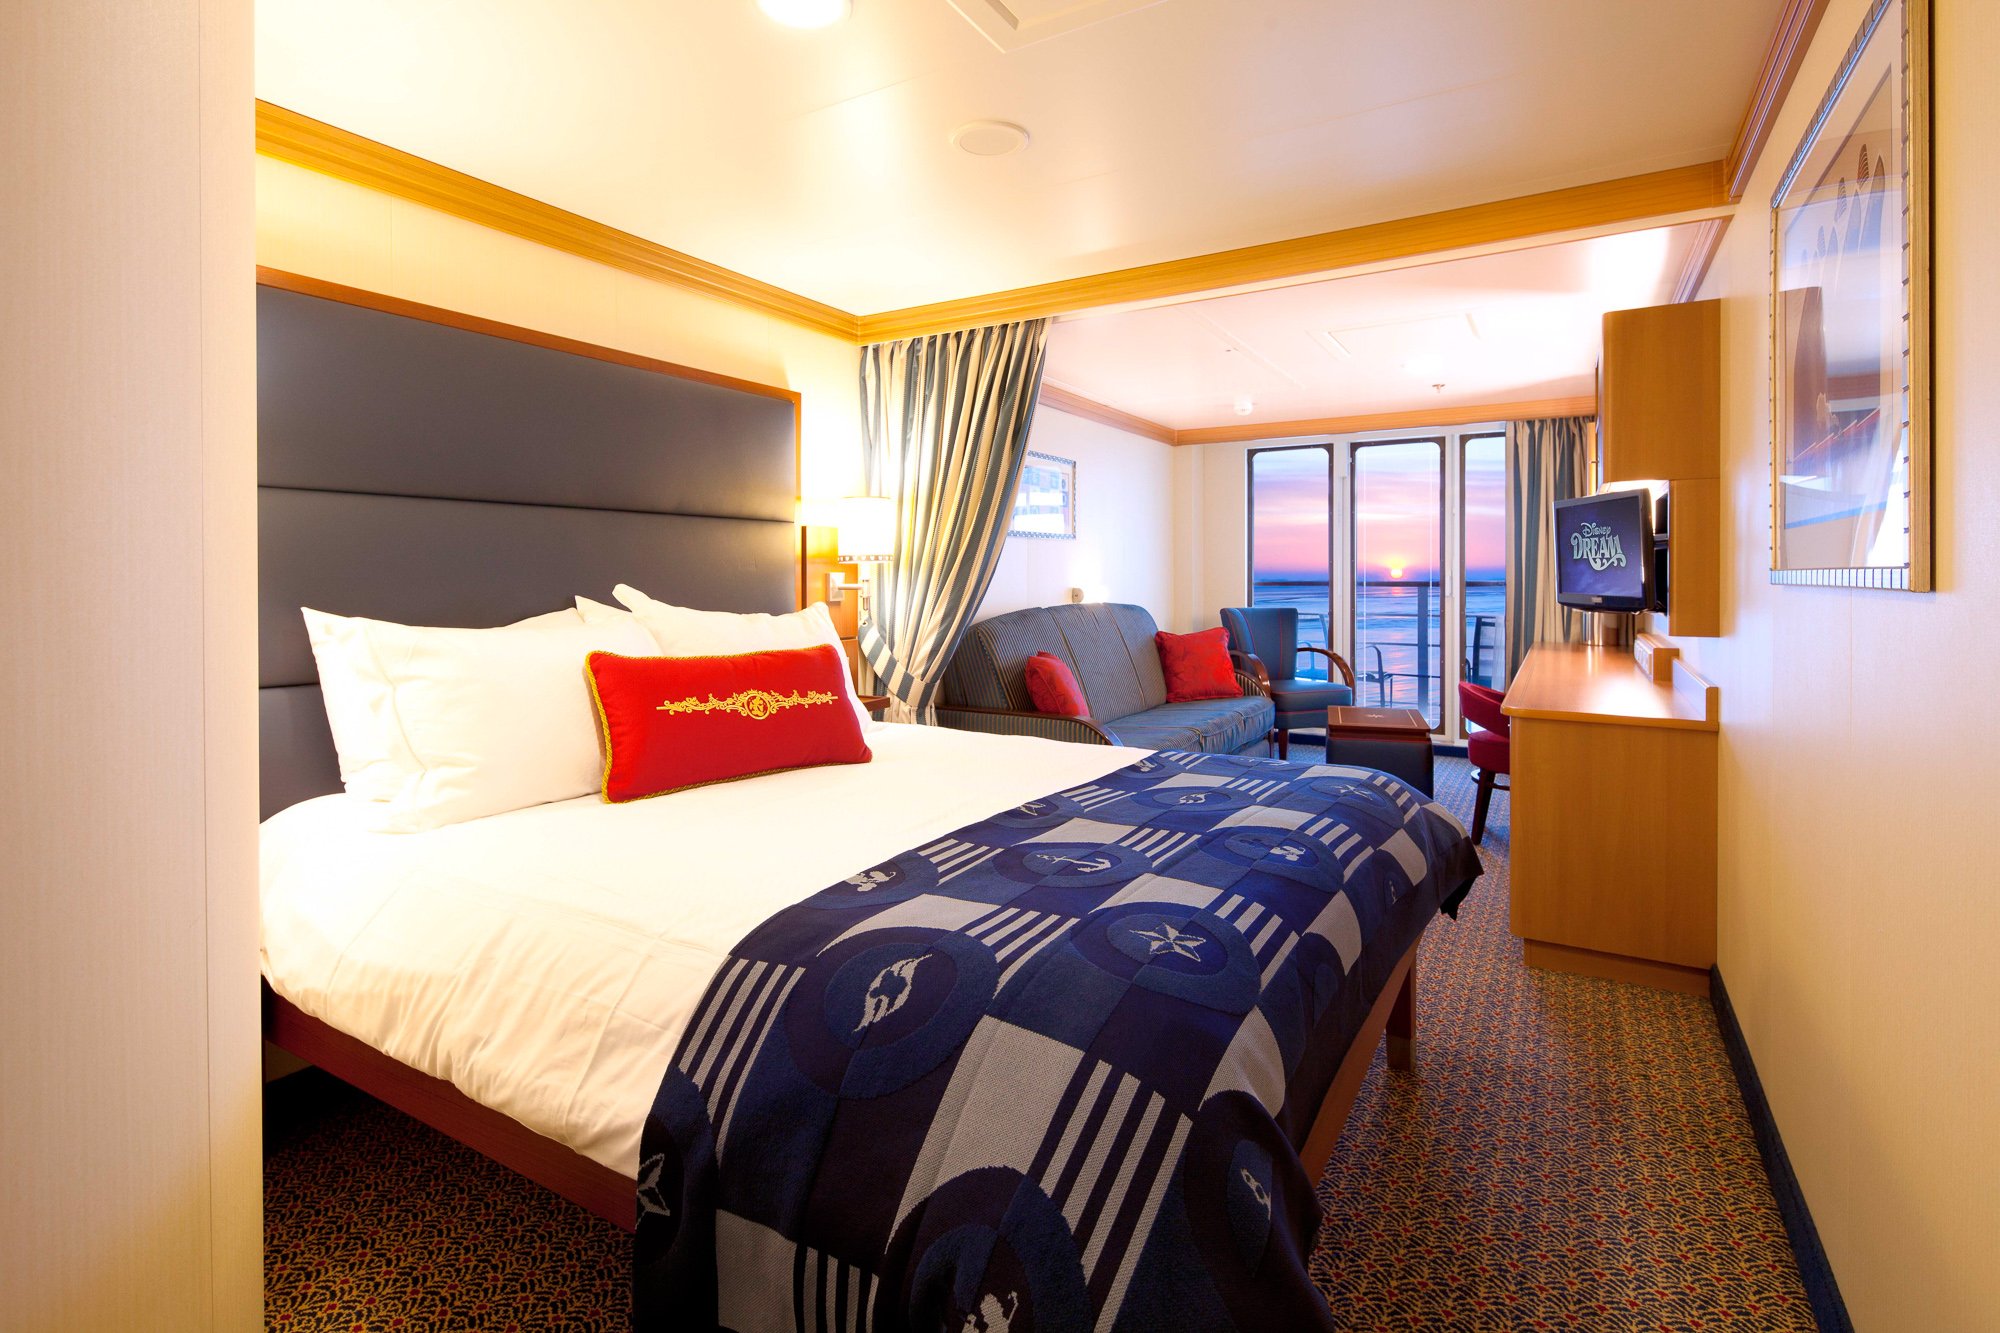 The parents' bed in the foreground of the Deluxe Family Oceanview Stateroom with Verandah on Disney Dream, with curtain to separate from the convertible kids' sleeping area